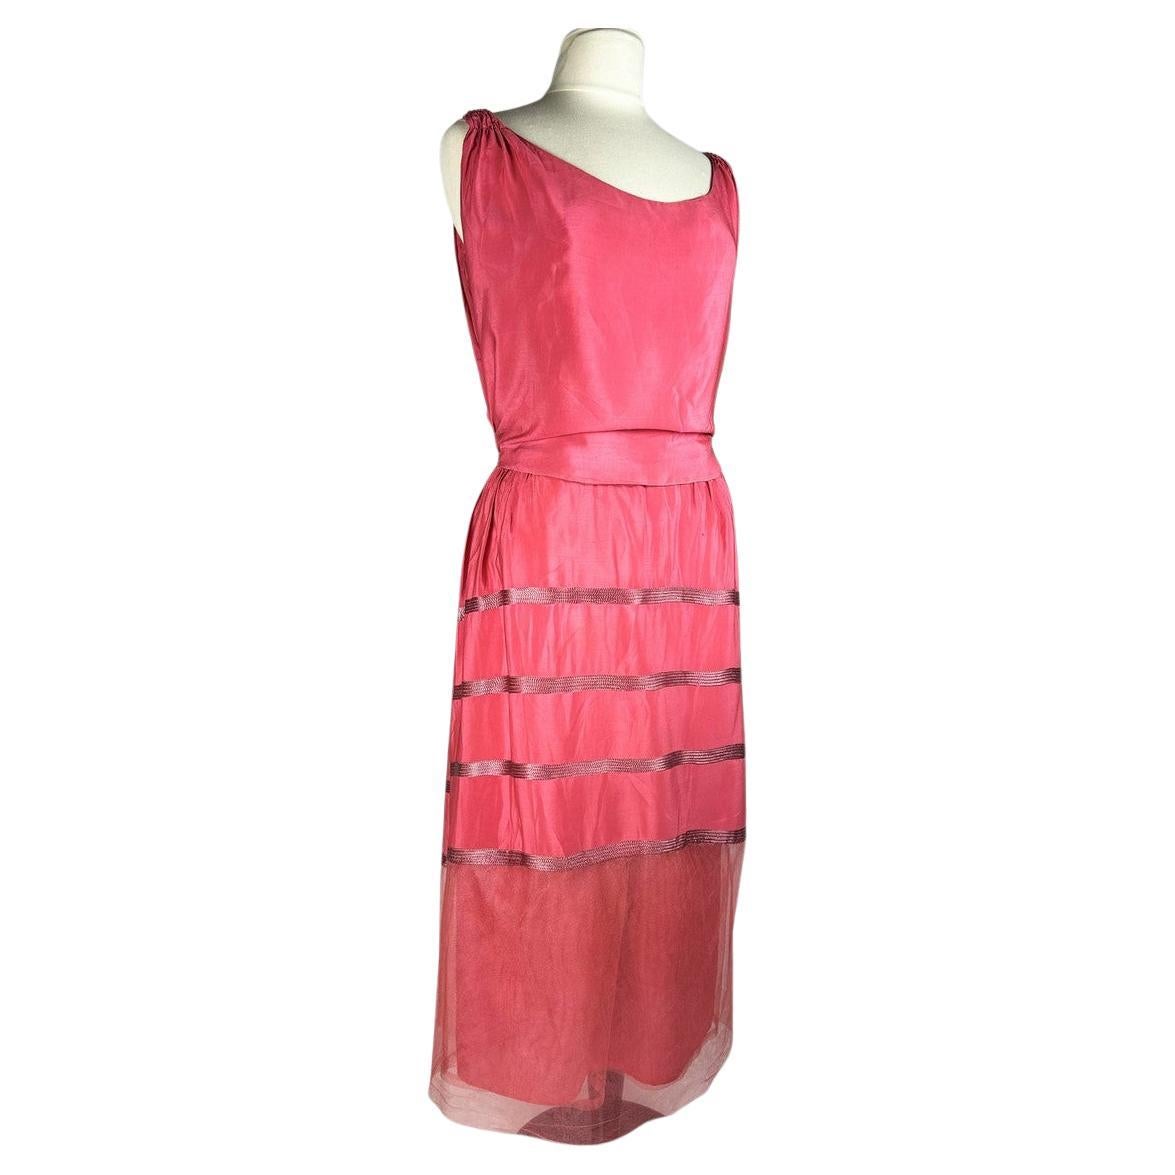 Art Deco dress in coral pink silk crepe and tulle - France Circa 1920-1925 For Sale